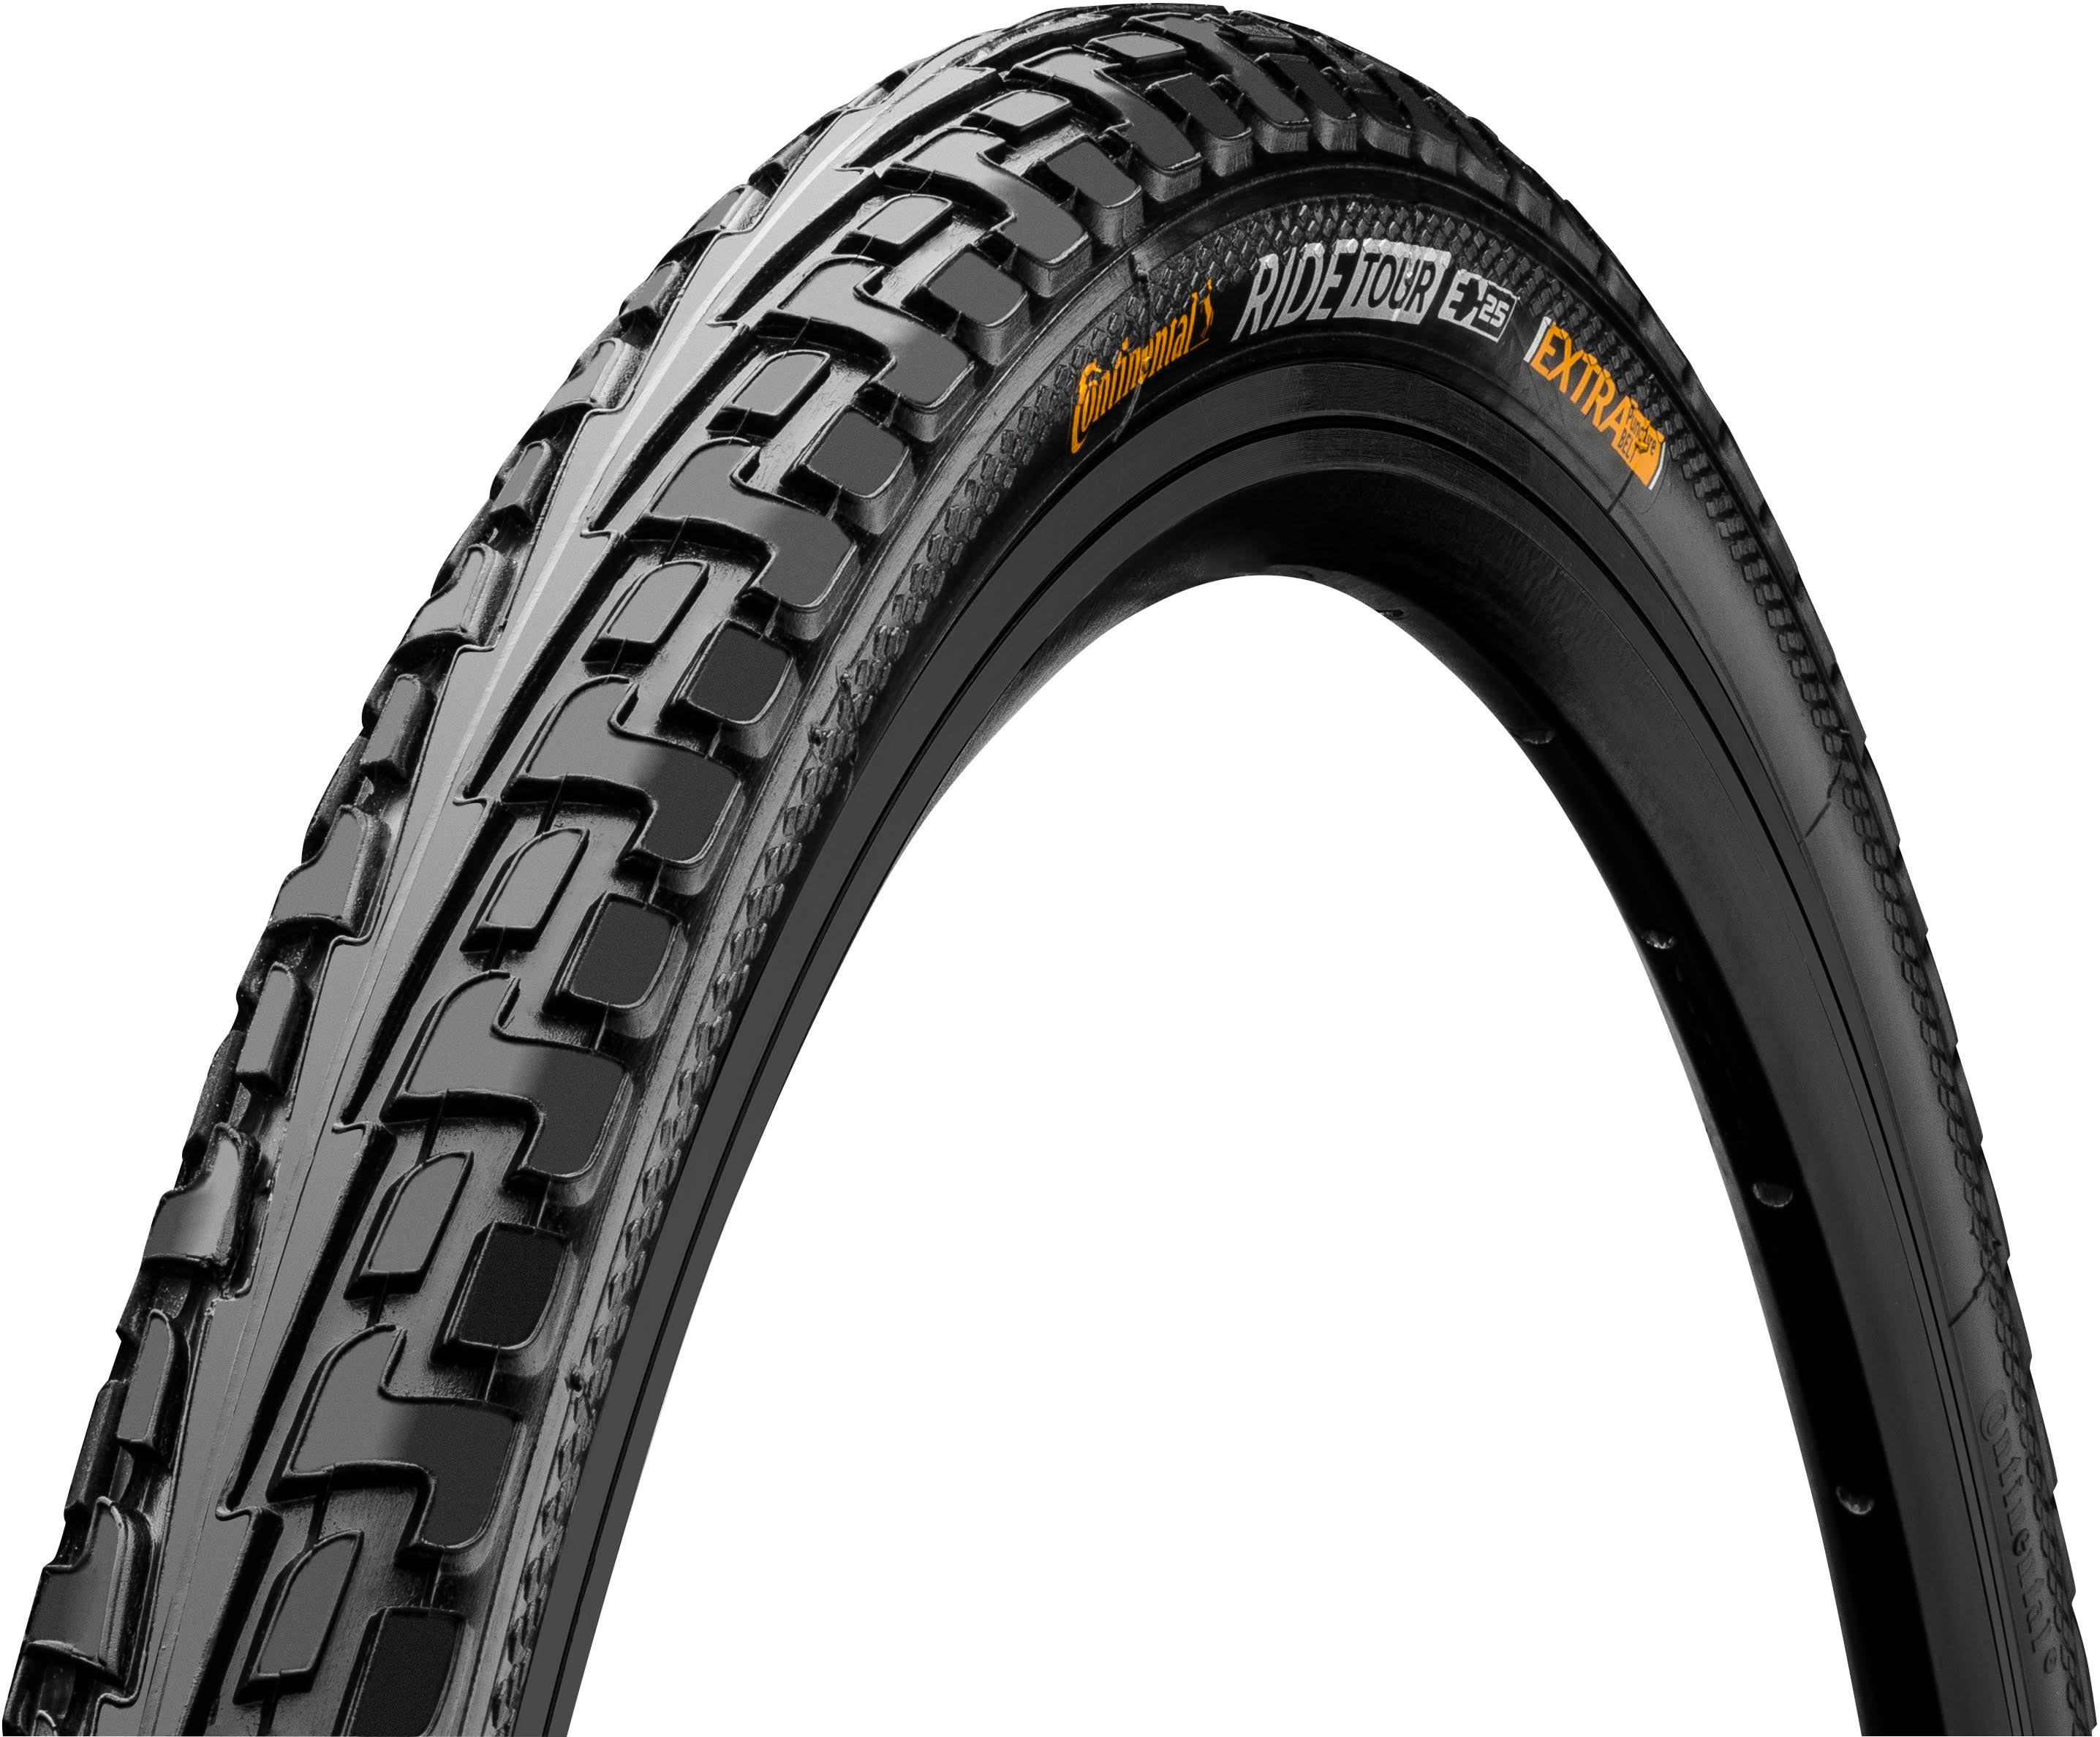 Continental Ride Tour Cycle Tyre Hybrid Road Commuter Touring Bikes - 700 x 32